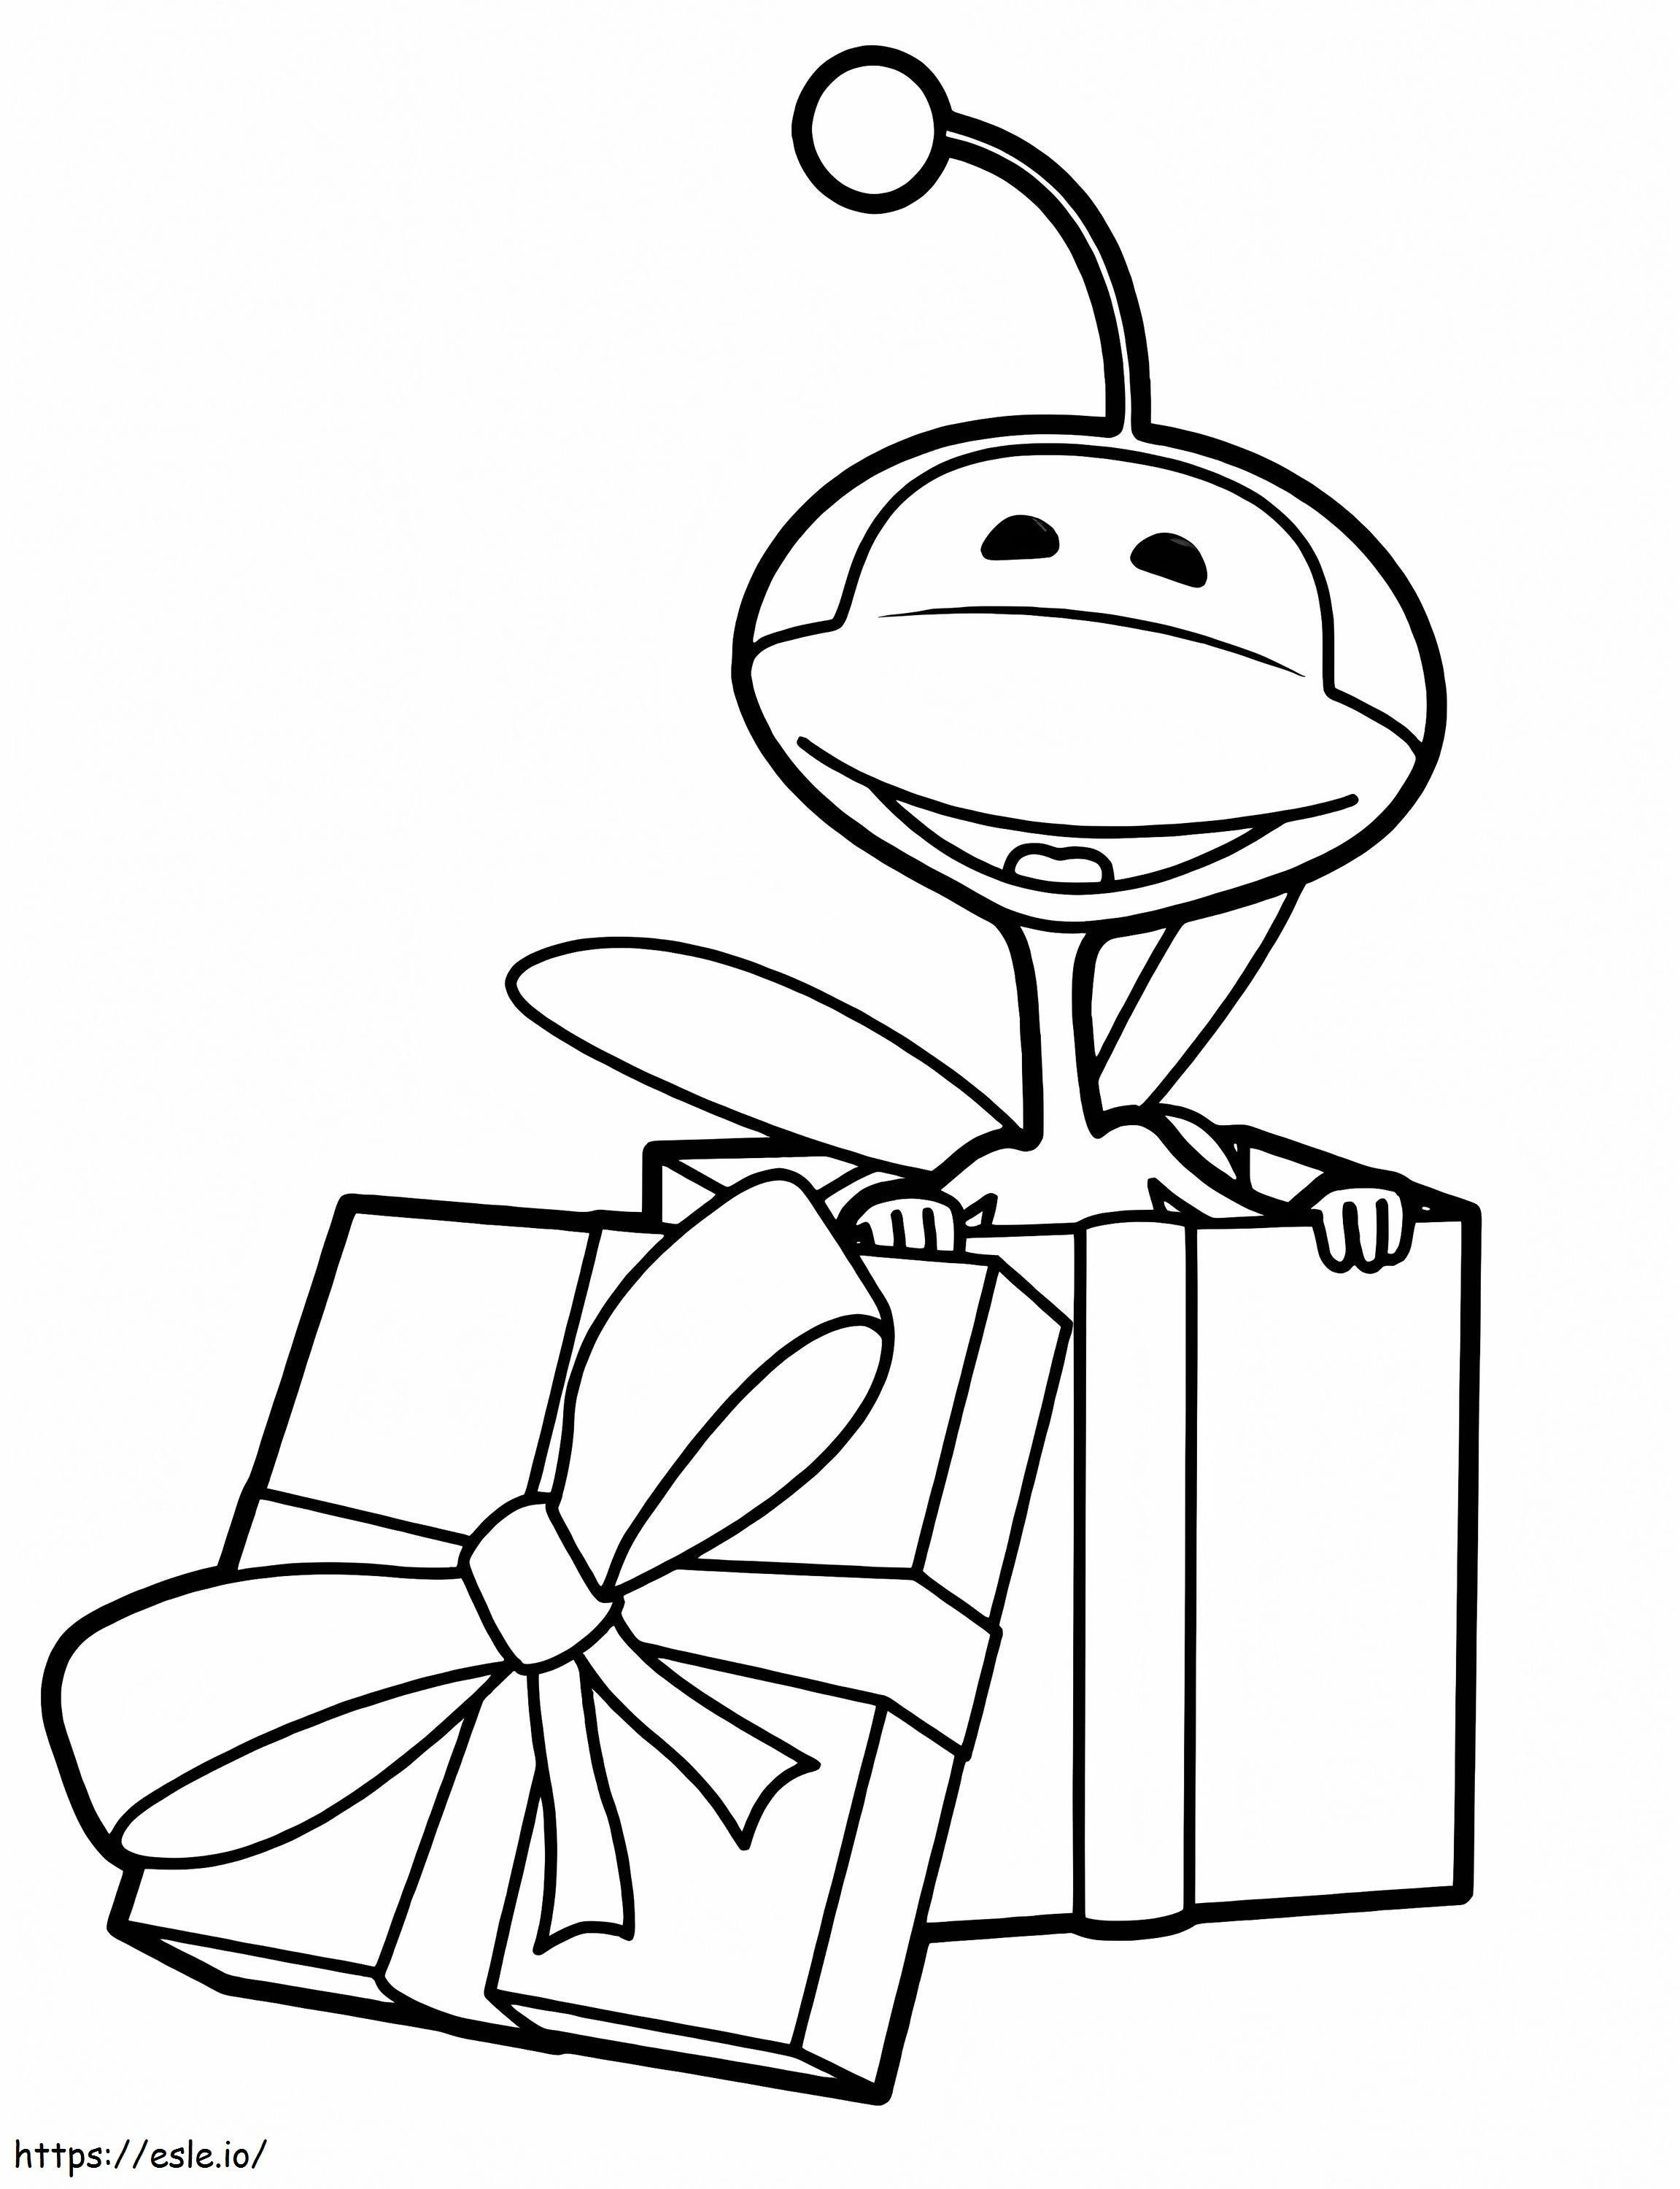 Uki In A Box coloring page